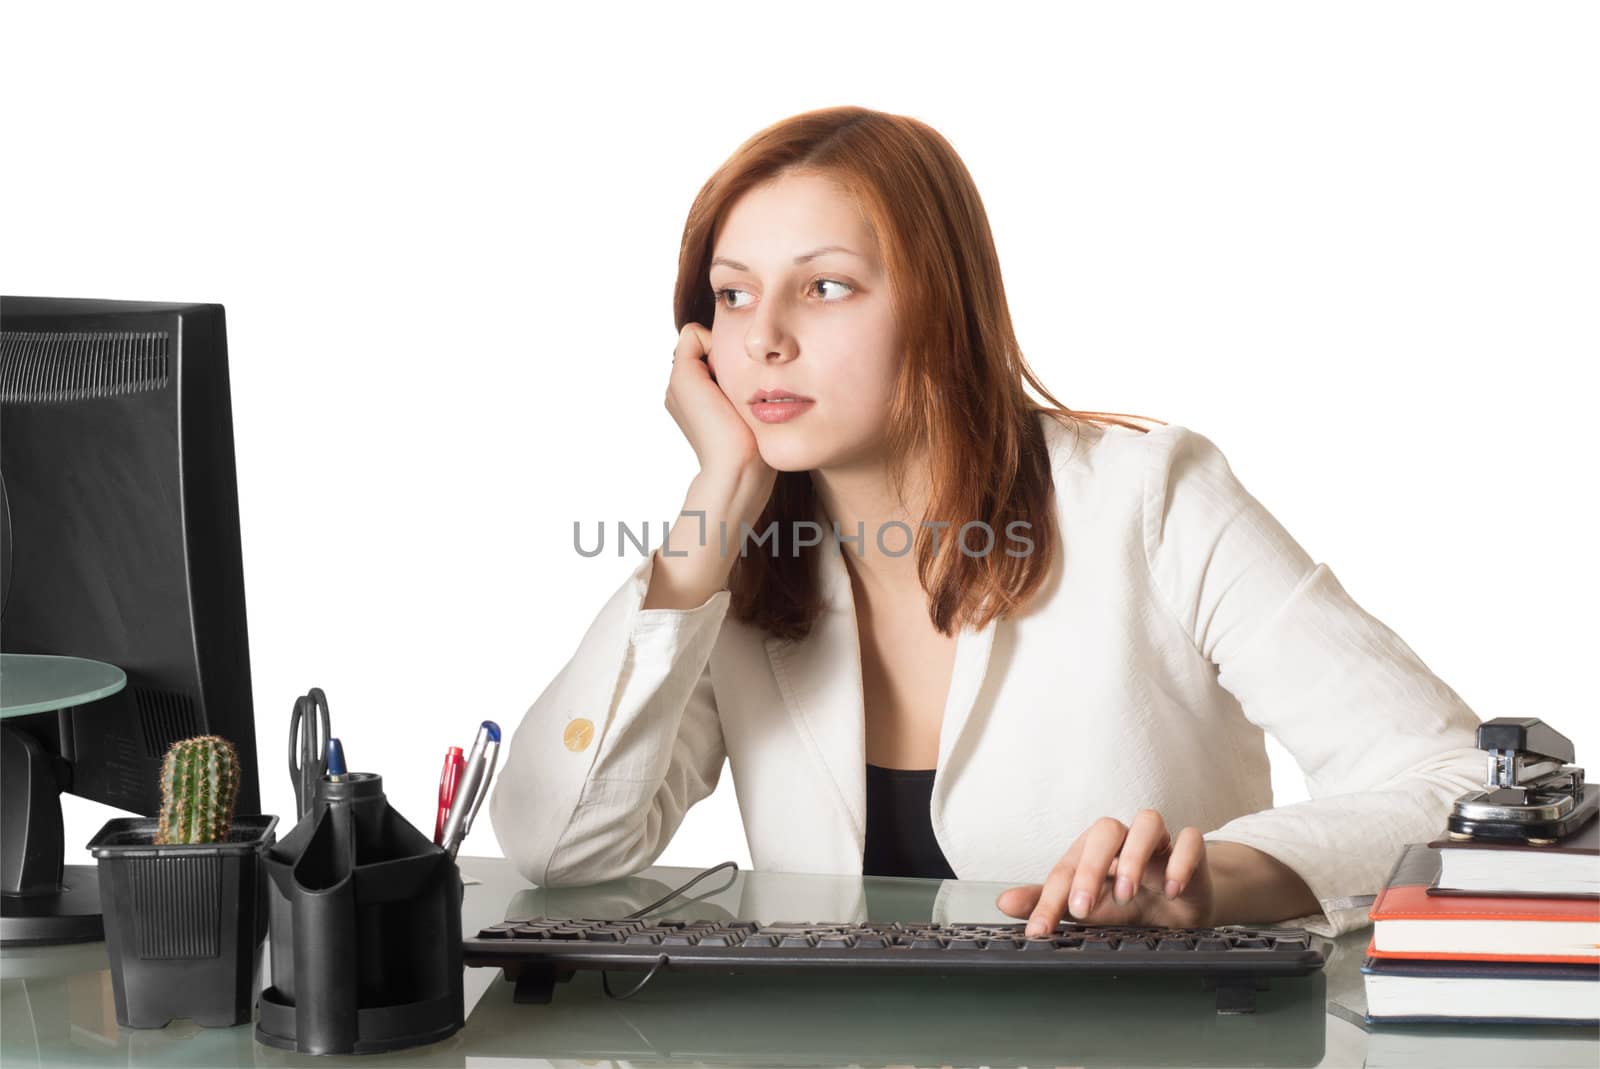 Secretary female typing on a computer keyboard in the office on a white background isolated